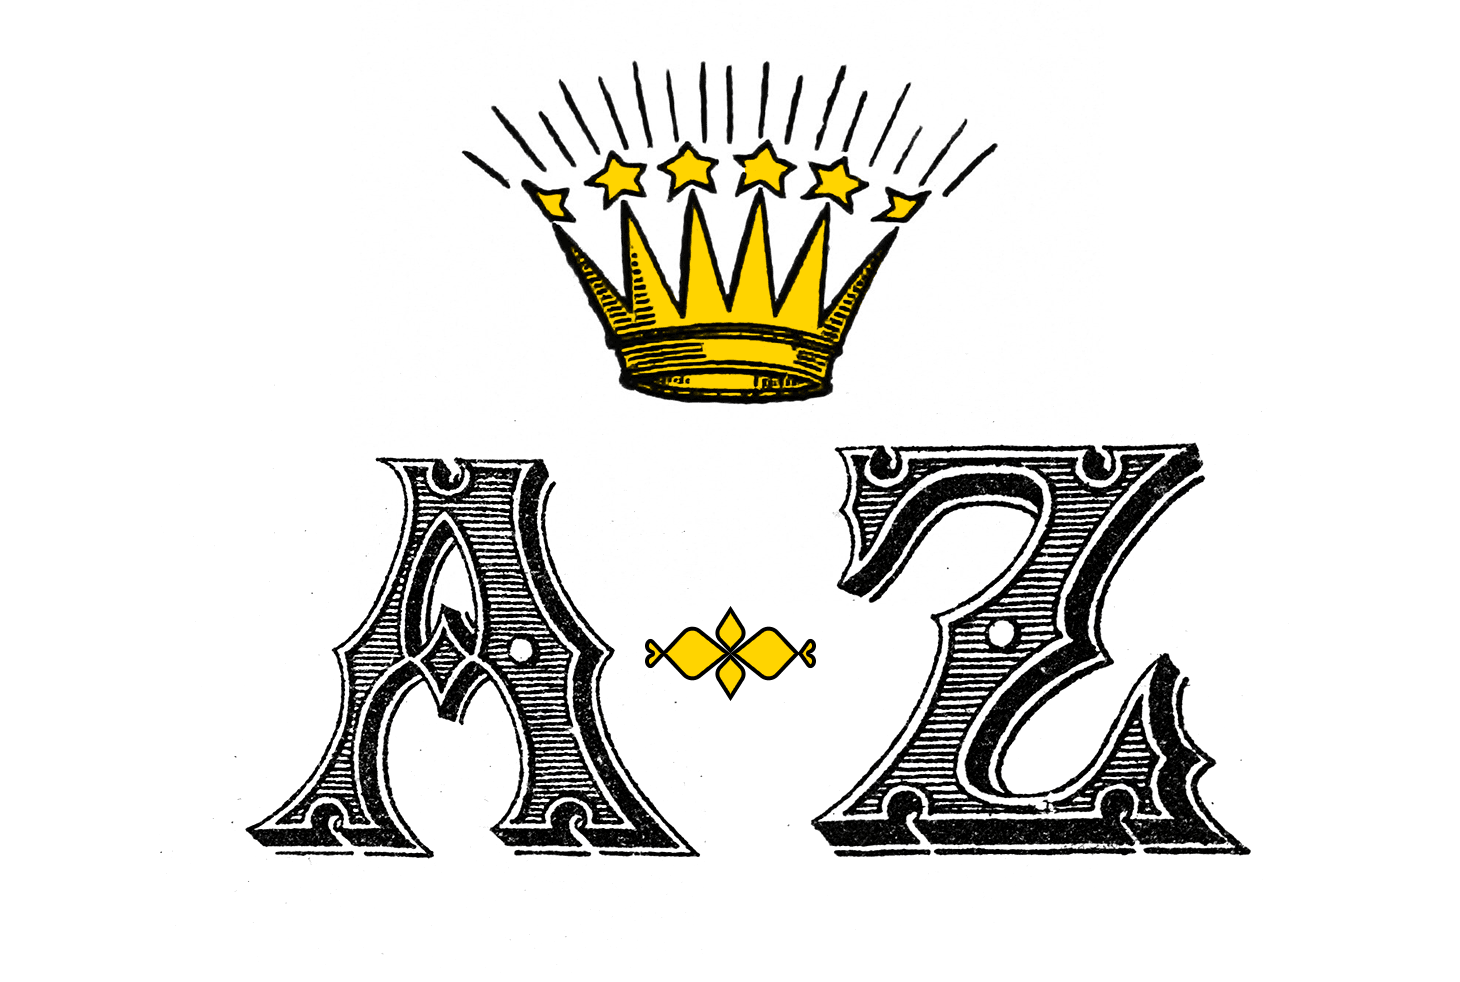 Illustration of A to Z with crown